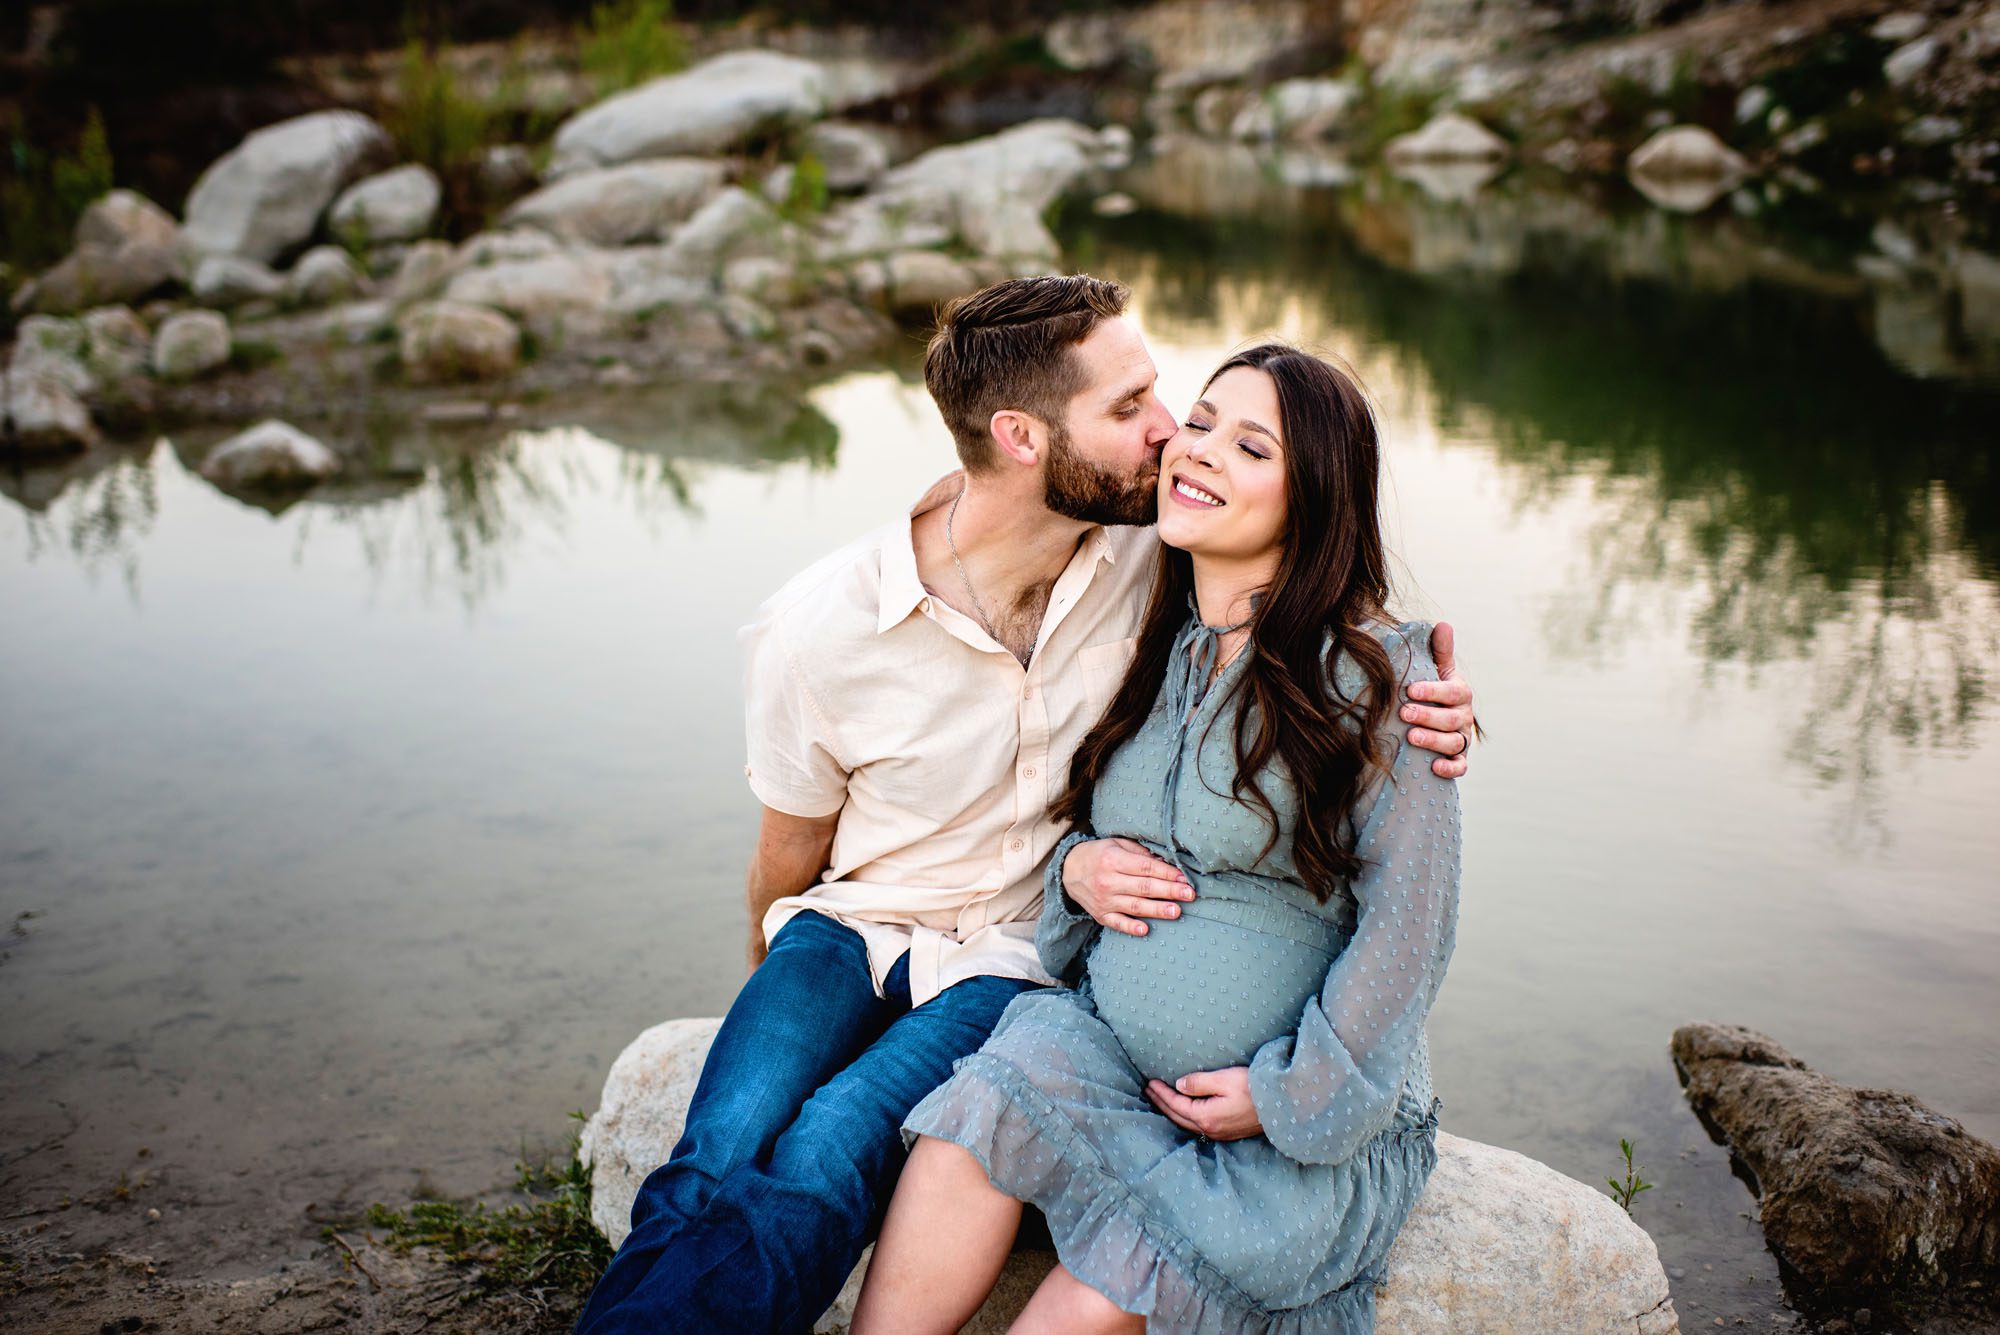 Husband kissing wife's cheek by the lake, Maternity photographer in San Antonio